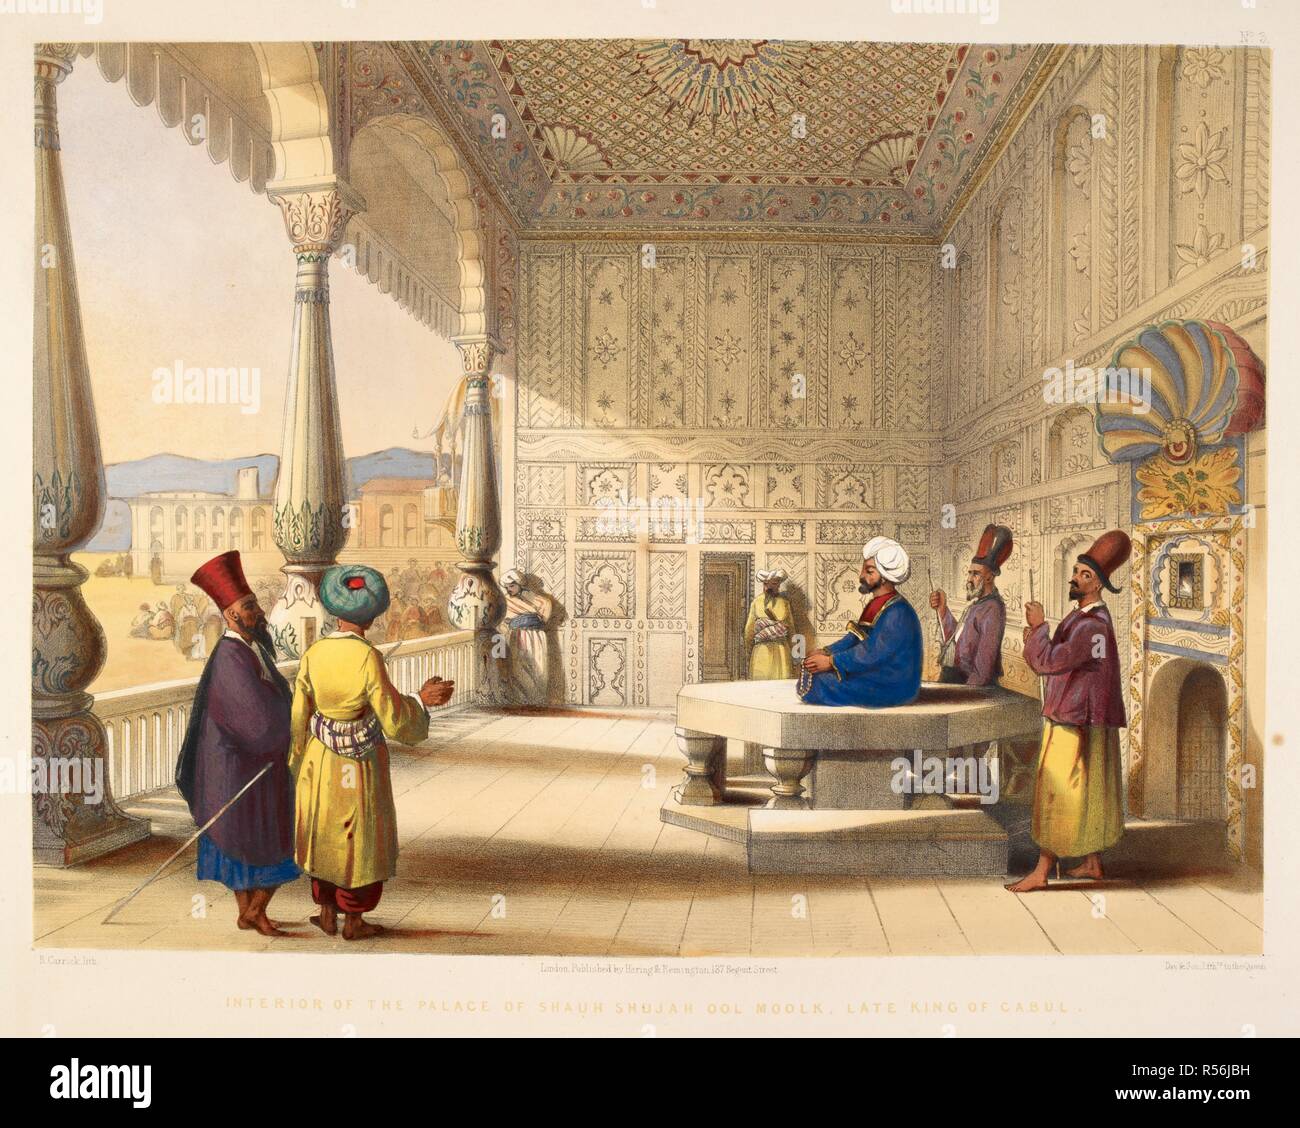 â€˜Interior of the Palace of Shauh Shujah ool Moolk, late King of Caubulâ€™. Costumes and Scenery of Afghaunistaun. Twenty-six lithographs variously by R. Carrick, E. Walker, W. Walton and Hulme after Lieut James Rattray. Hering & Remington, London, 1848. lithograph. Source: P2079. Language: English. Stock Photo